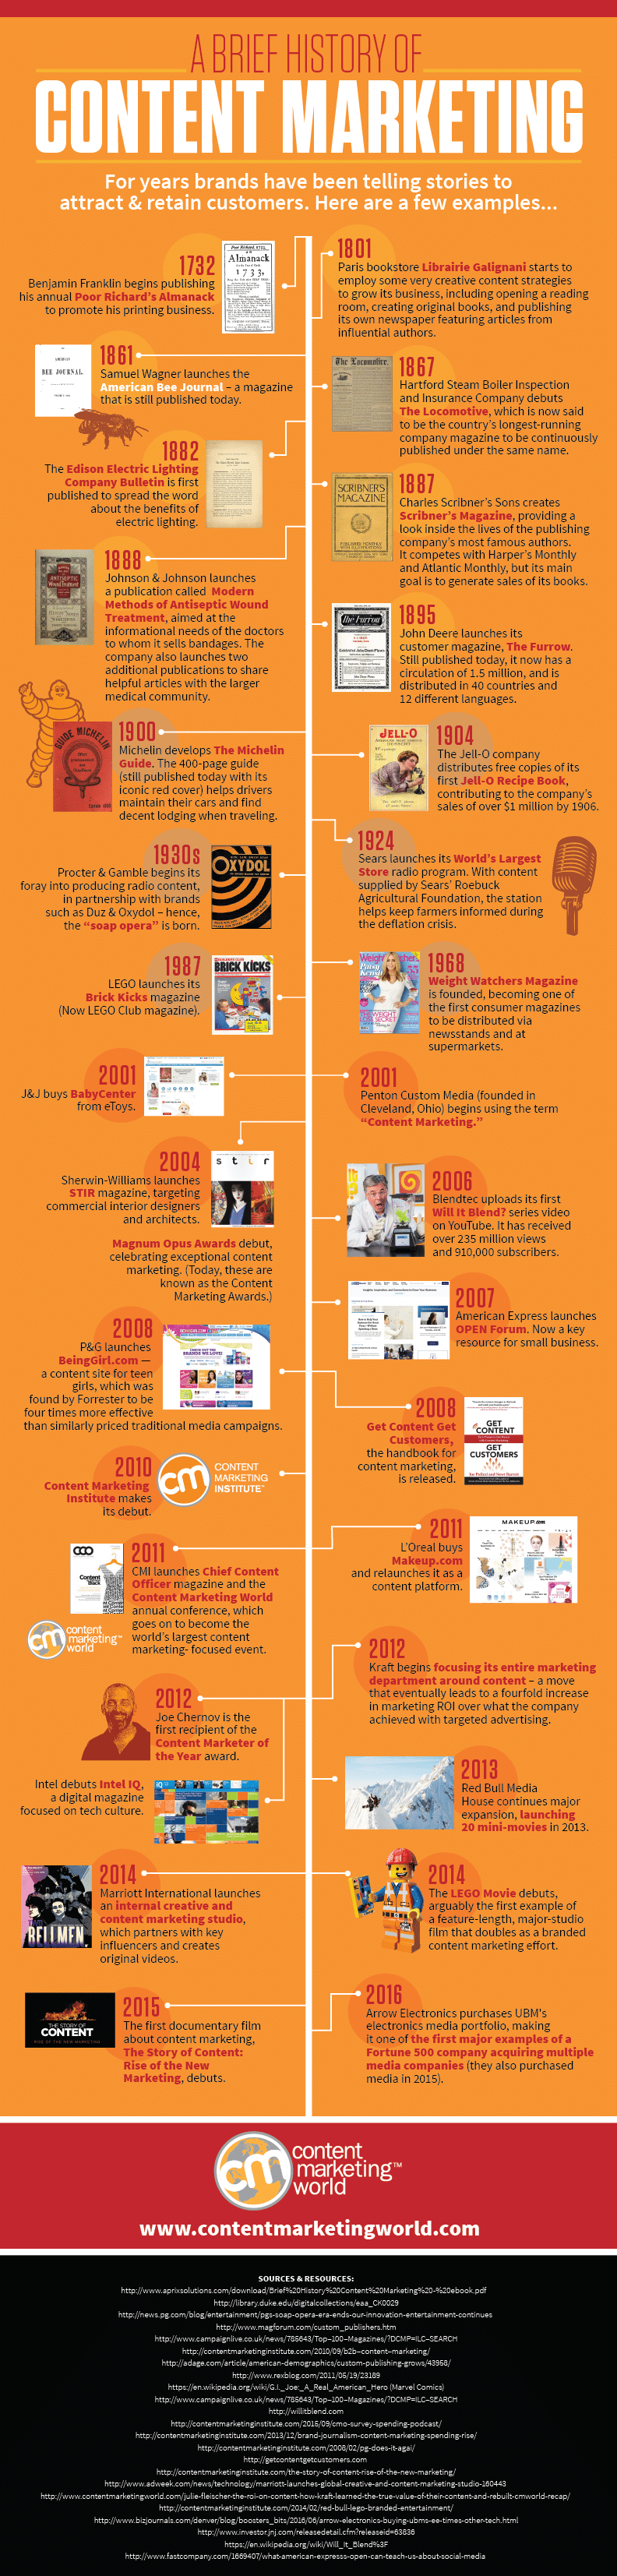 History of Content Marketing